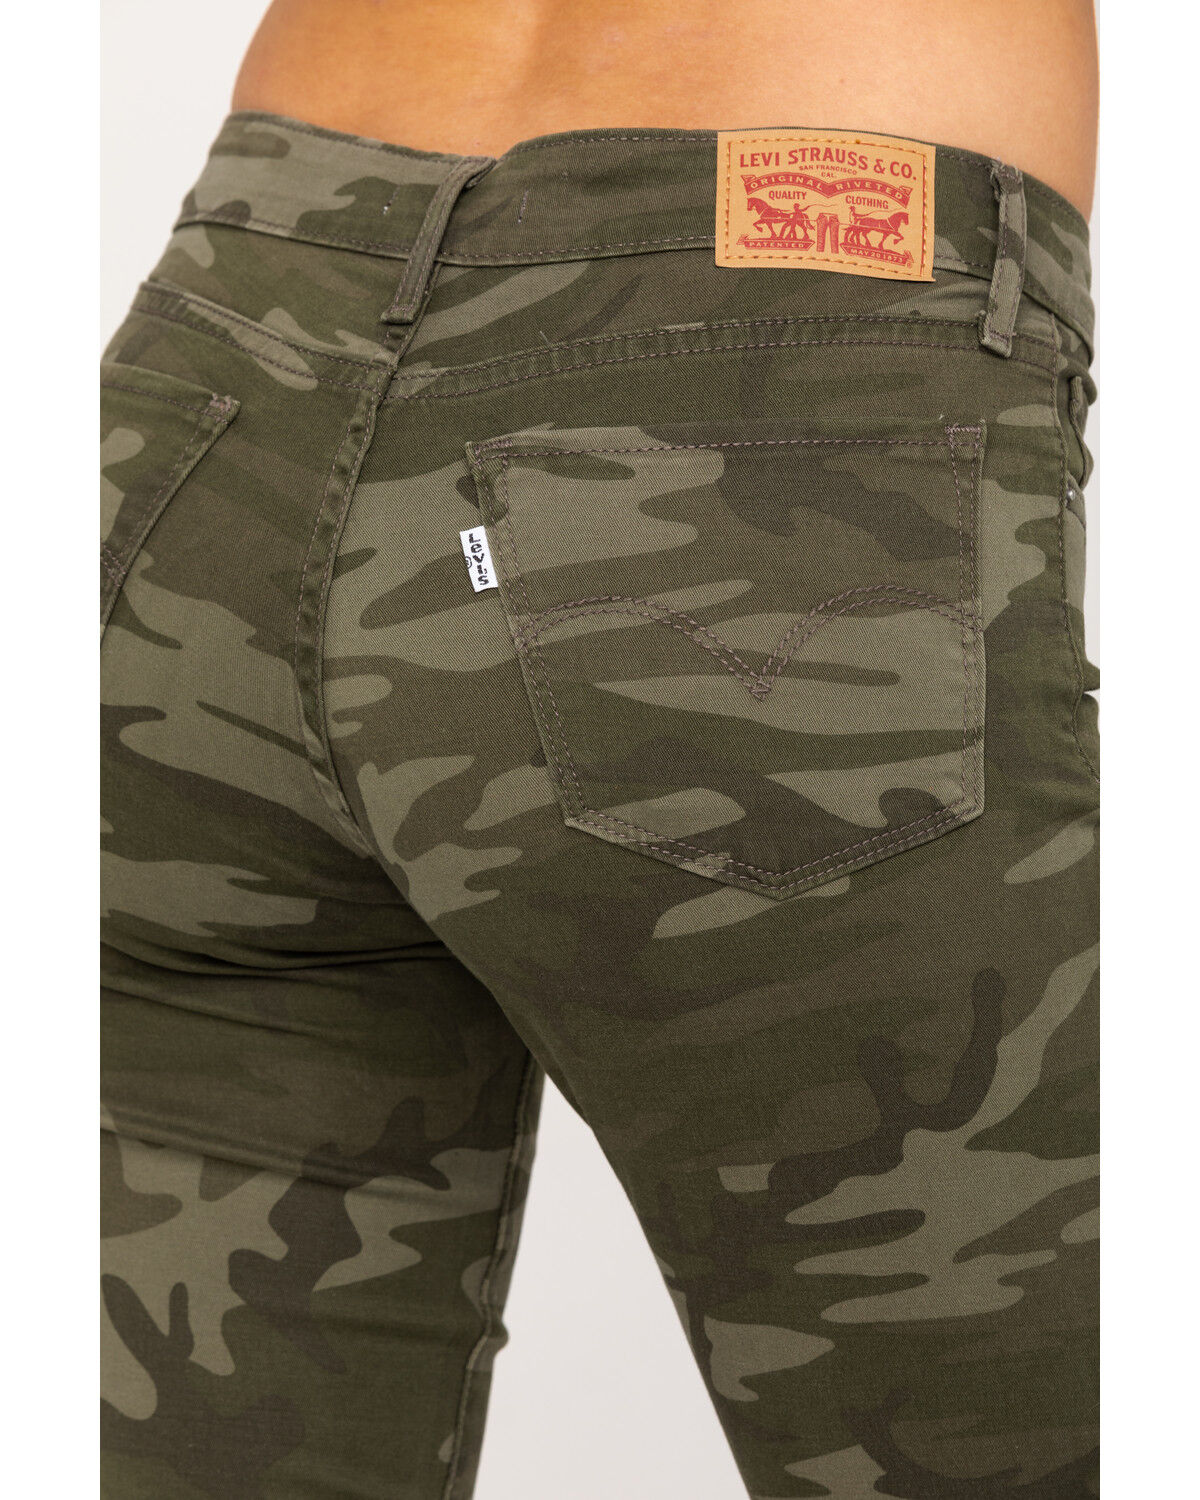 levi camouflage jeans